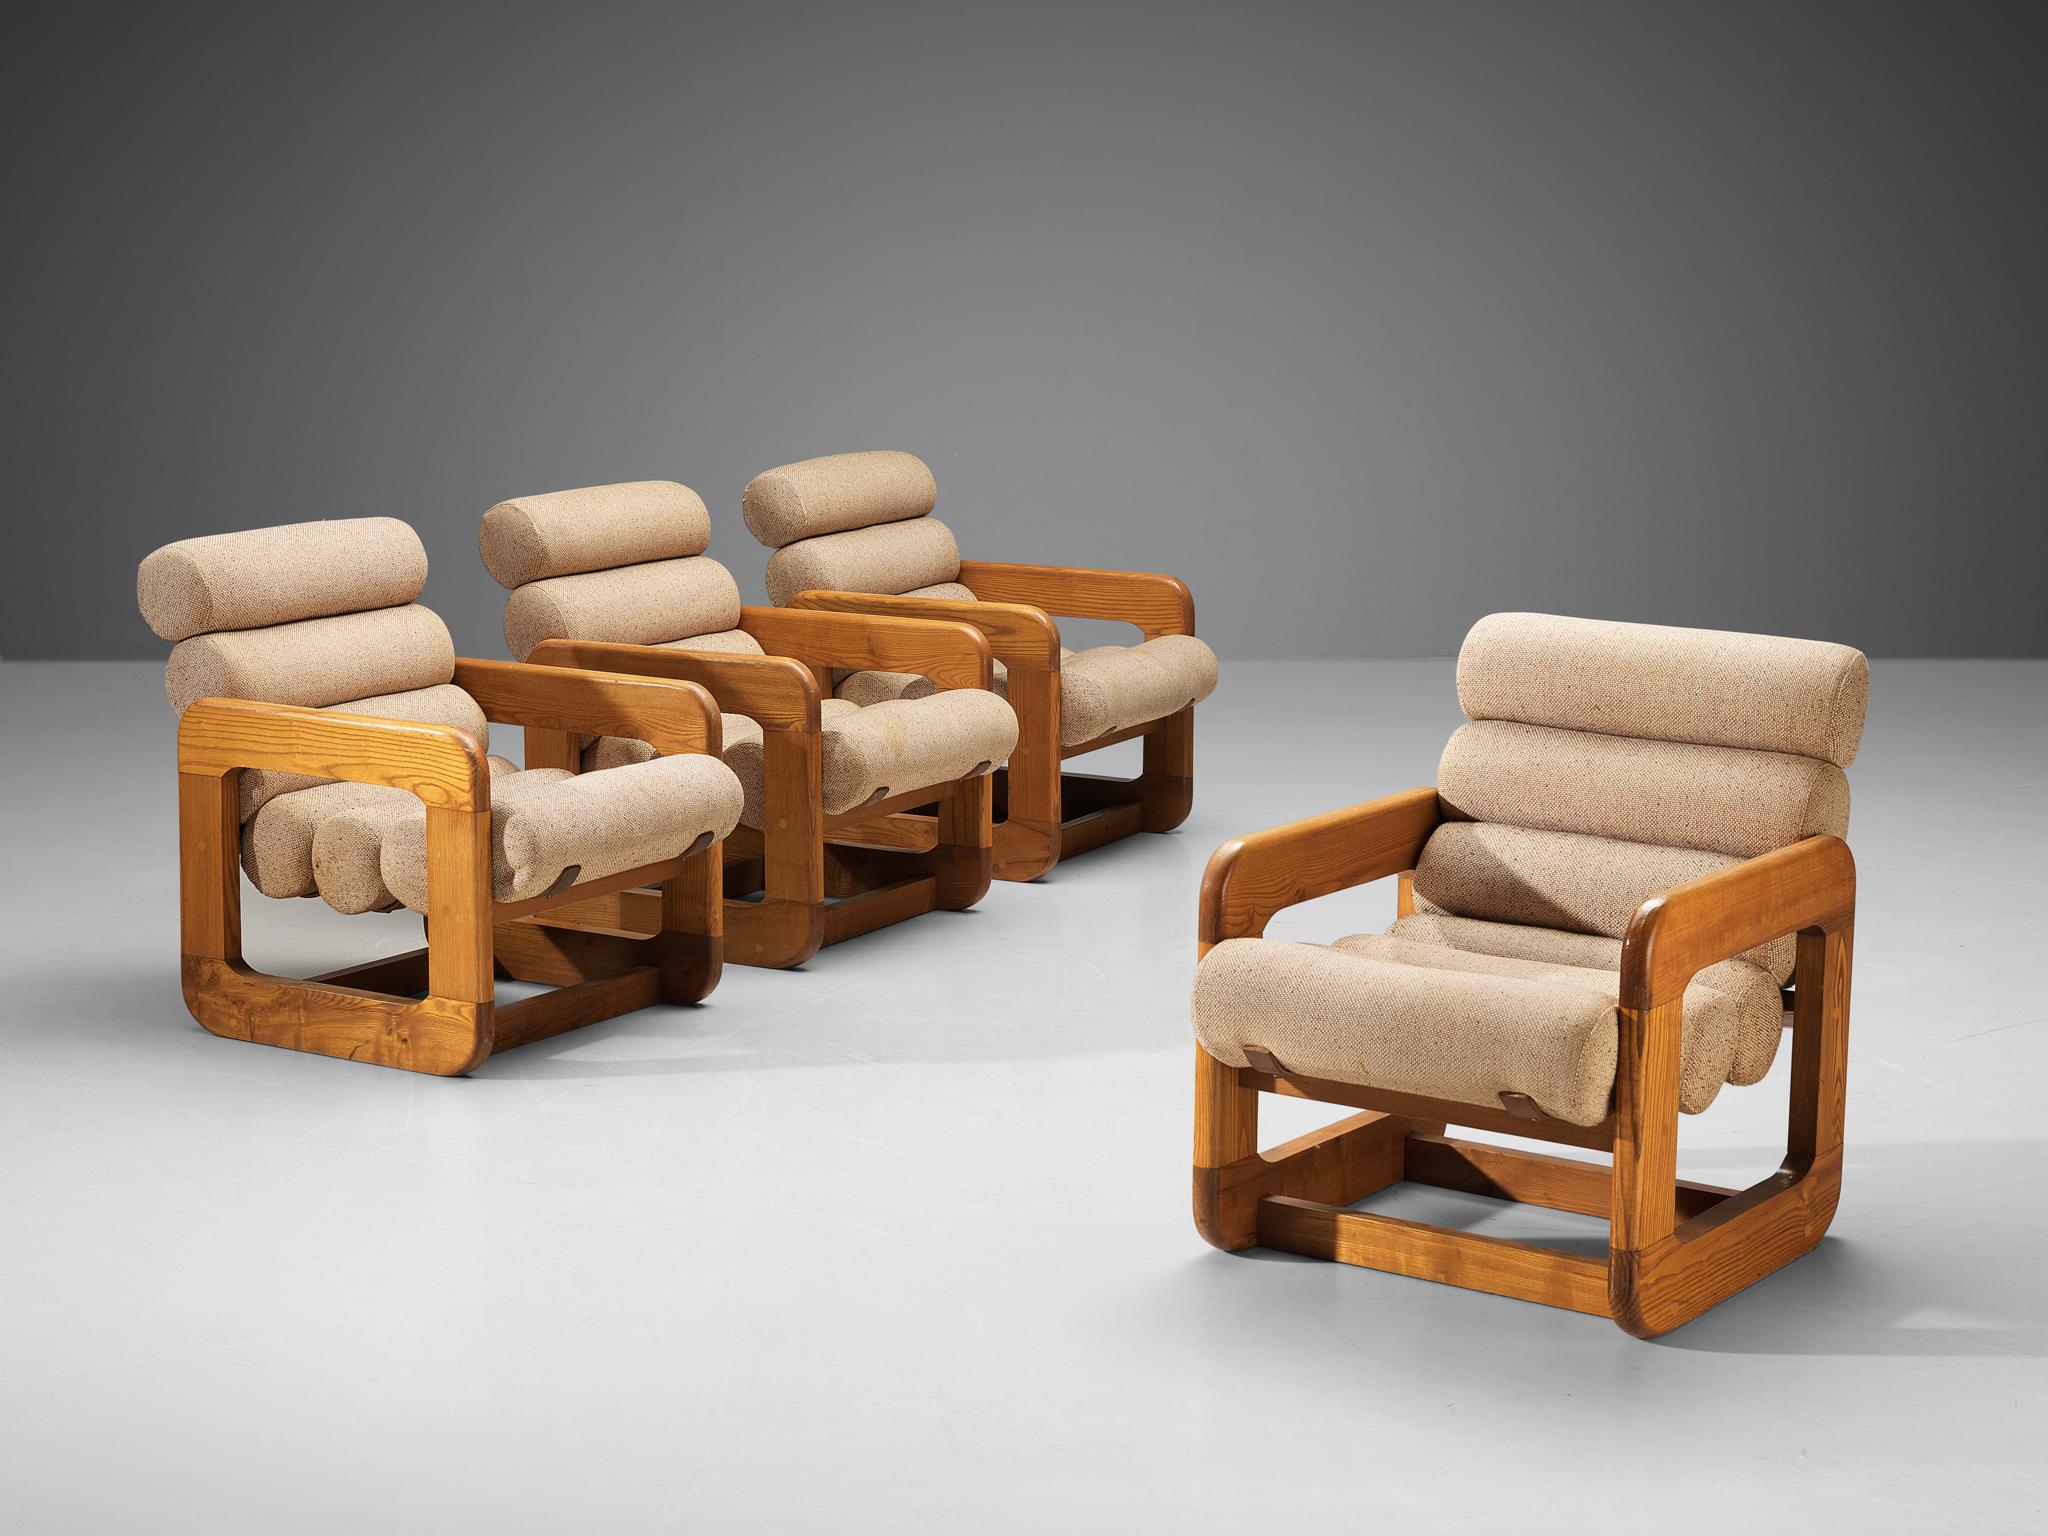 Lounge chairs, ash, fabric, Europe, 1970s.

Set of four unconventional lounge chairs that feature an outstanding design. The seating contains multiple tube-shaped cushions attached together to create a seat and backrest. The repetition of the